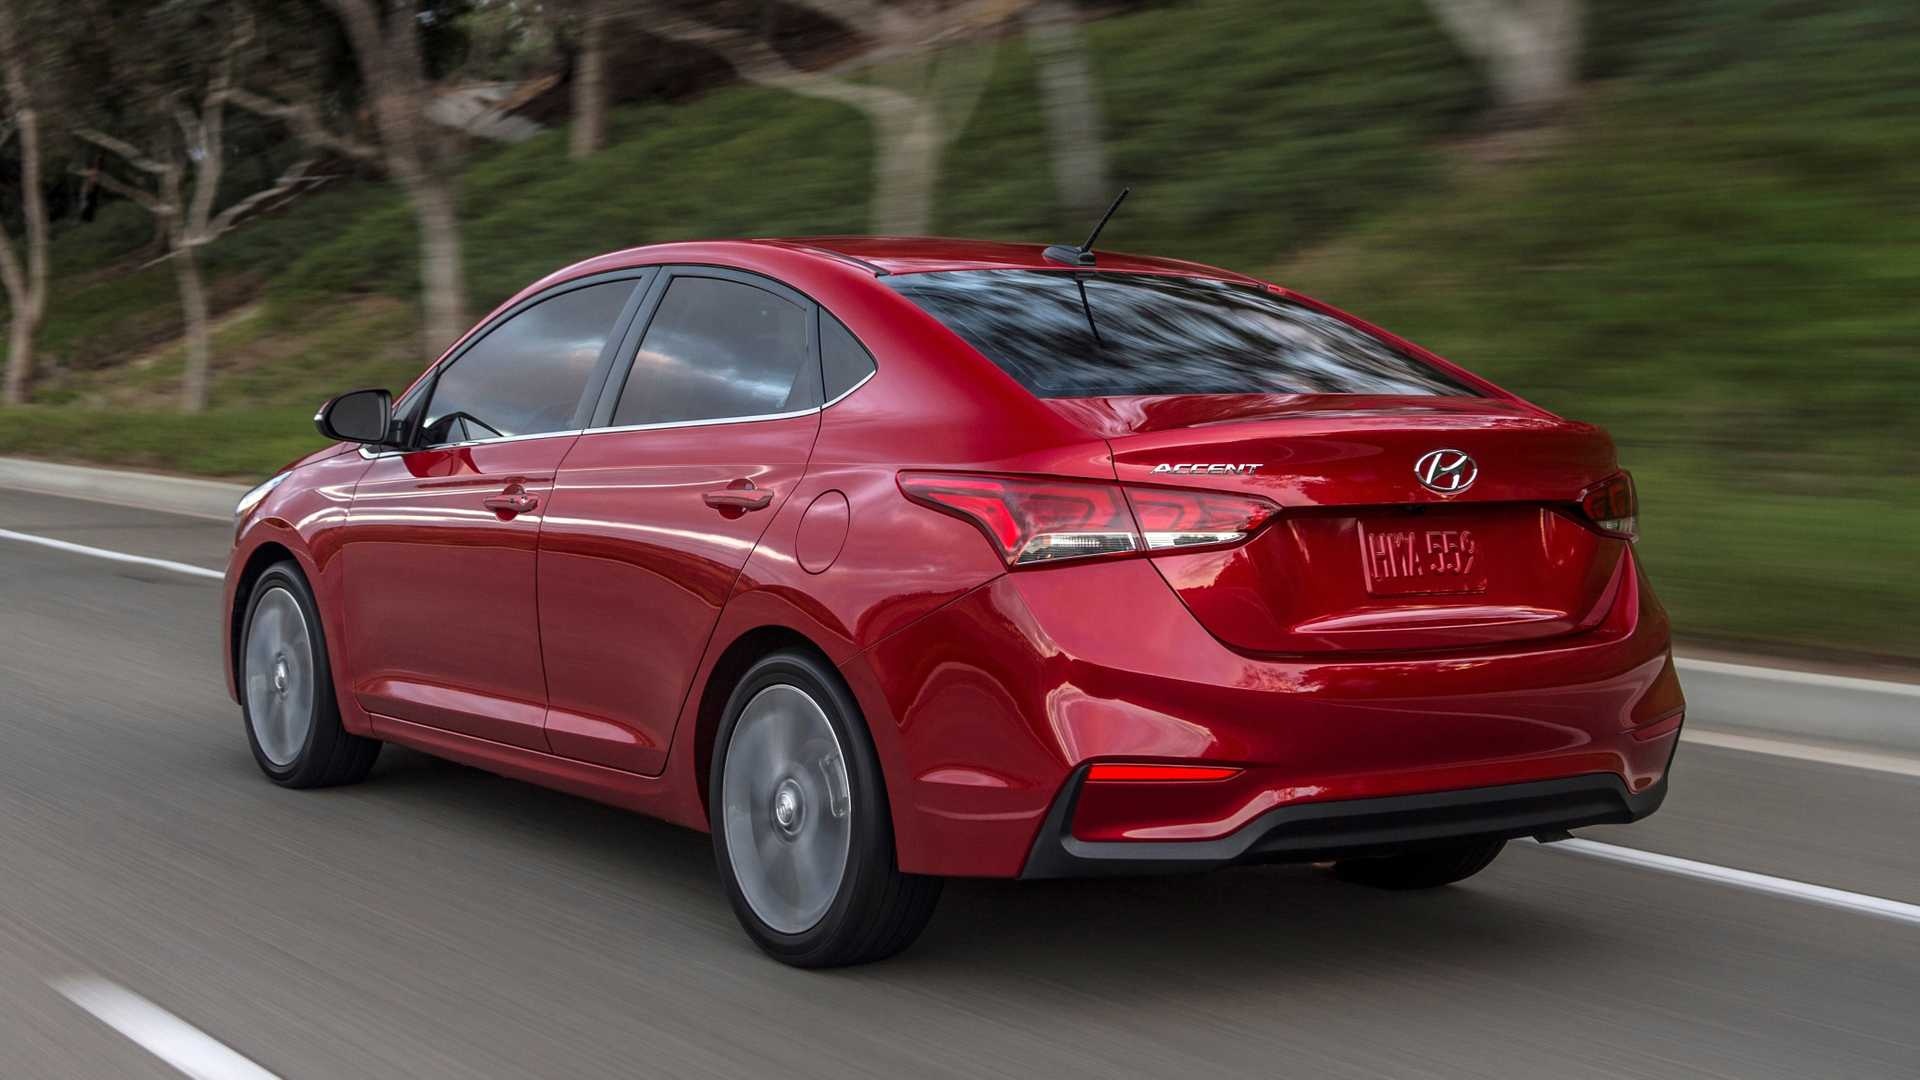 Hyundai Accent, 2020 model, Improved fuel economy, Engine and gearbox, 1920x1080 Full HD Desktop